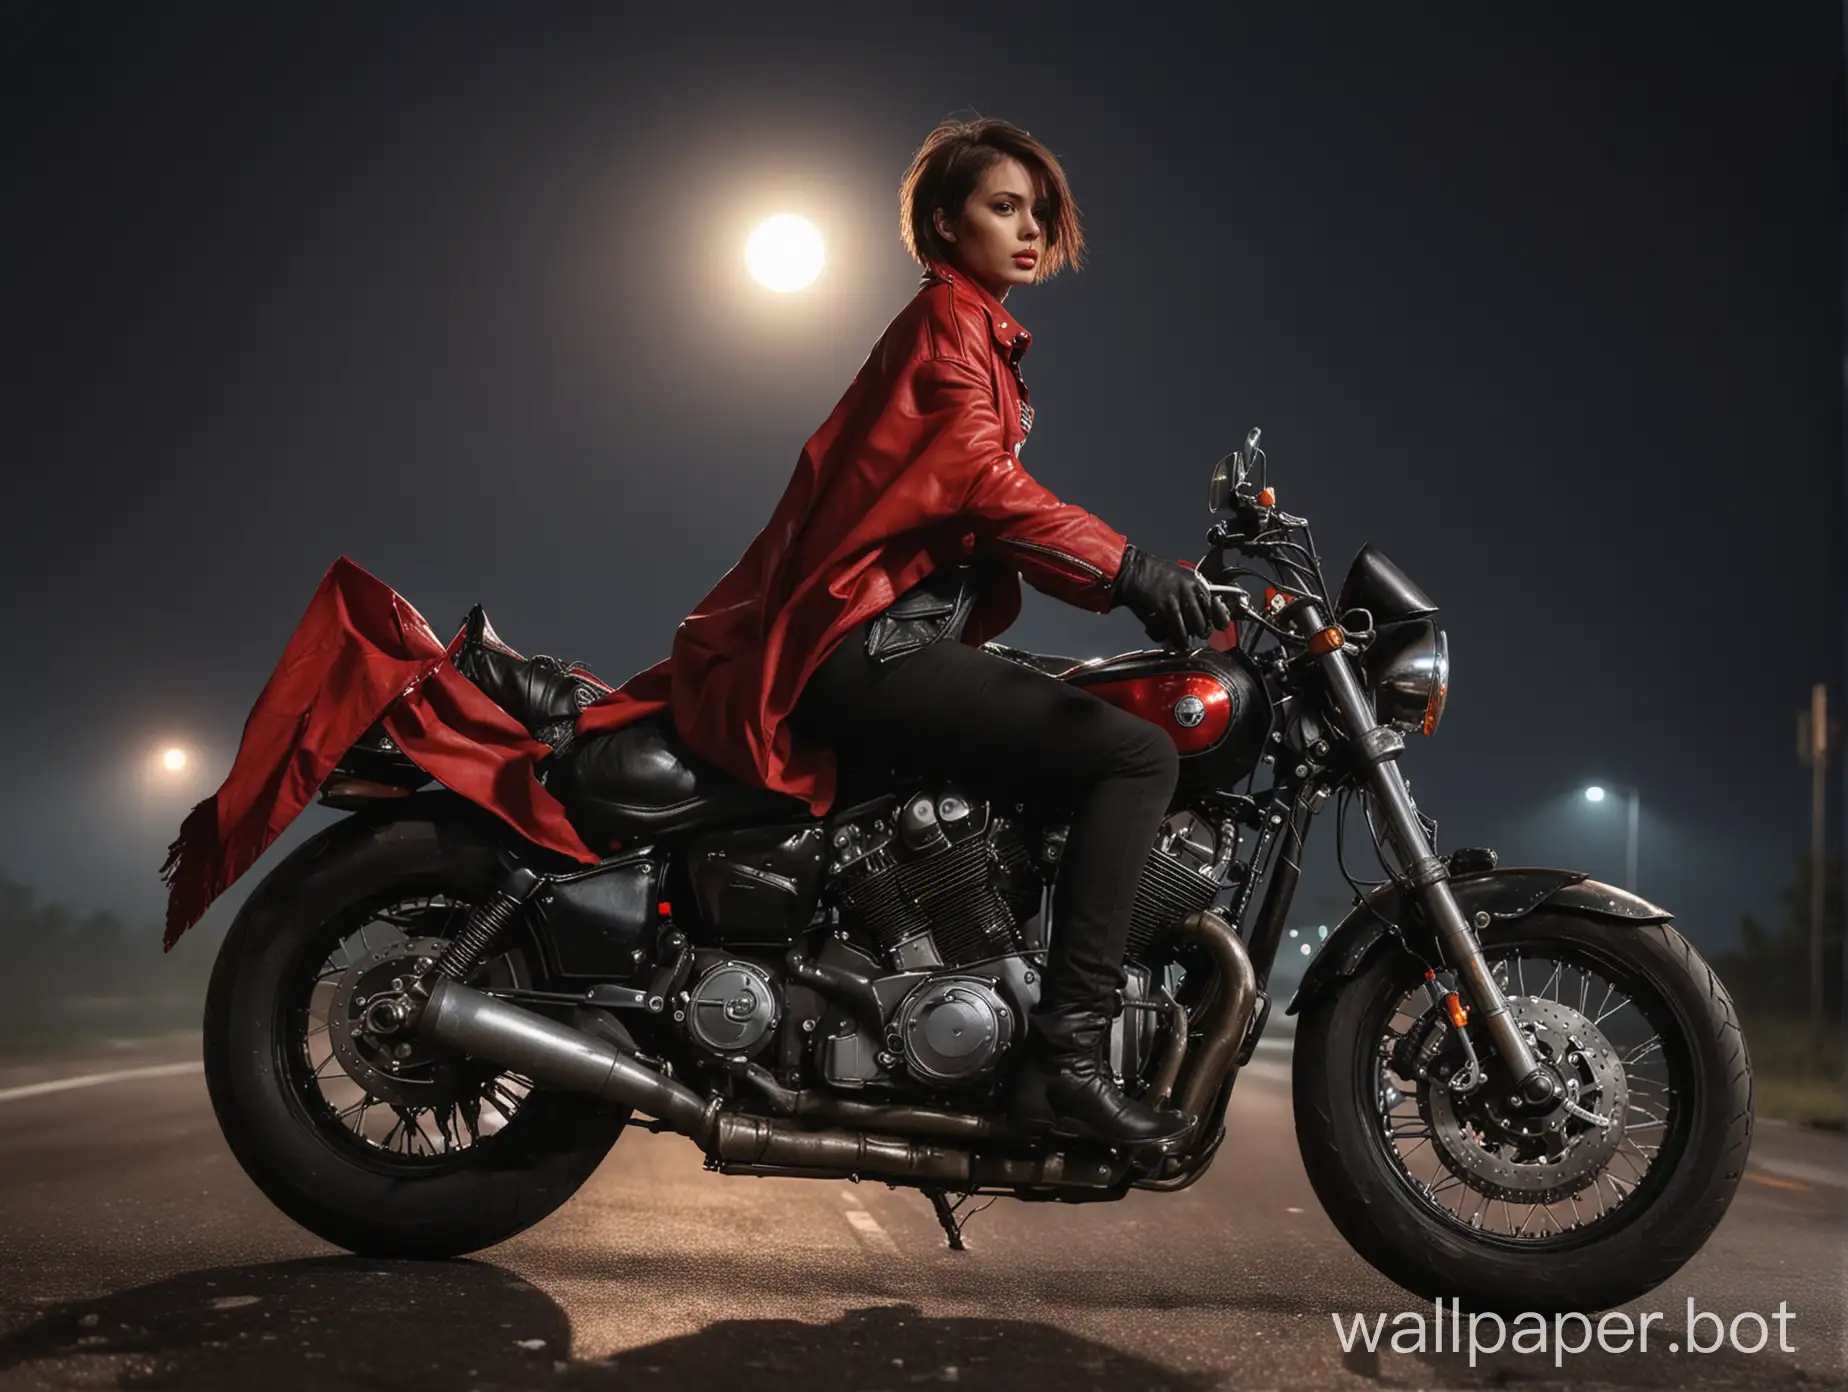 Seductive-Biker-Babe-ShortHaired-Beauty-Cruising-on-Highway-with-Moonlit-Sky